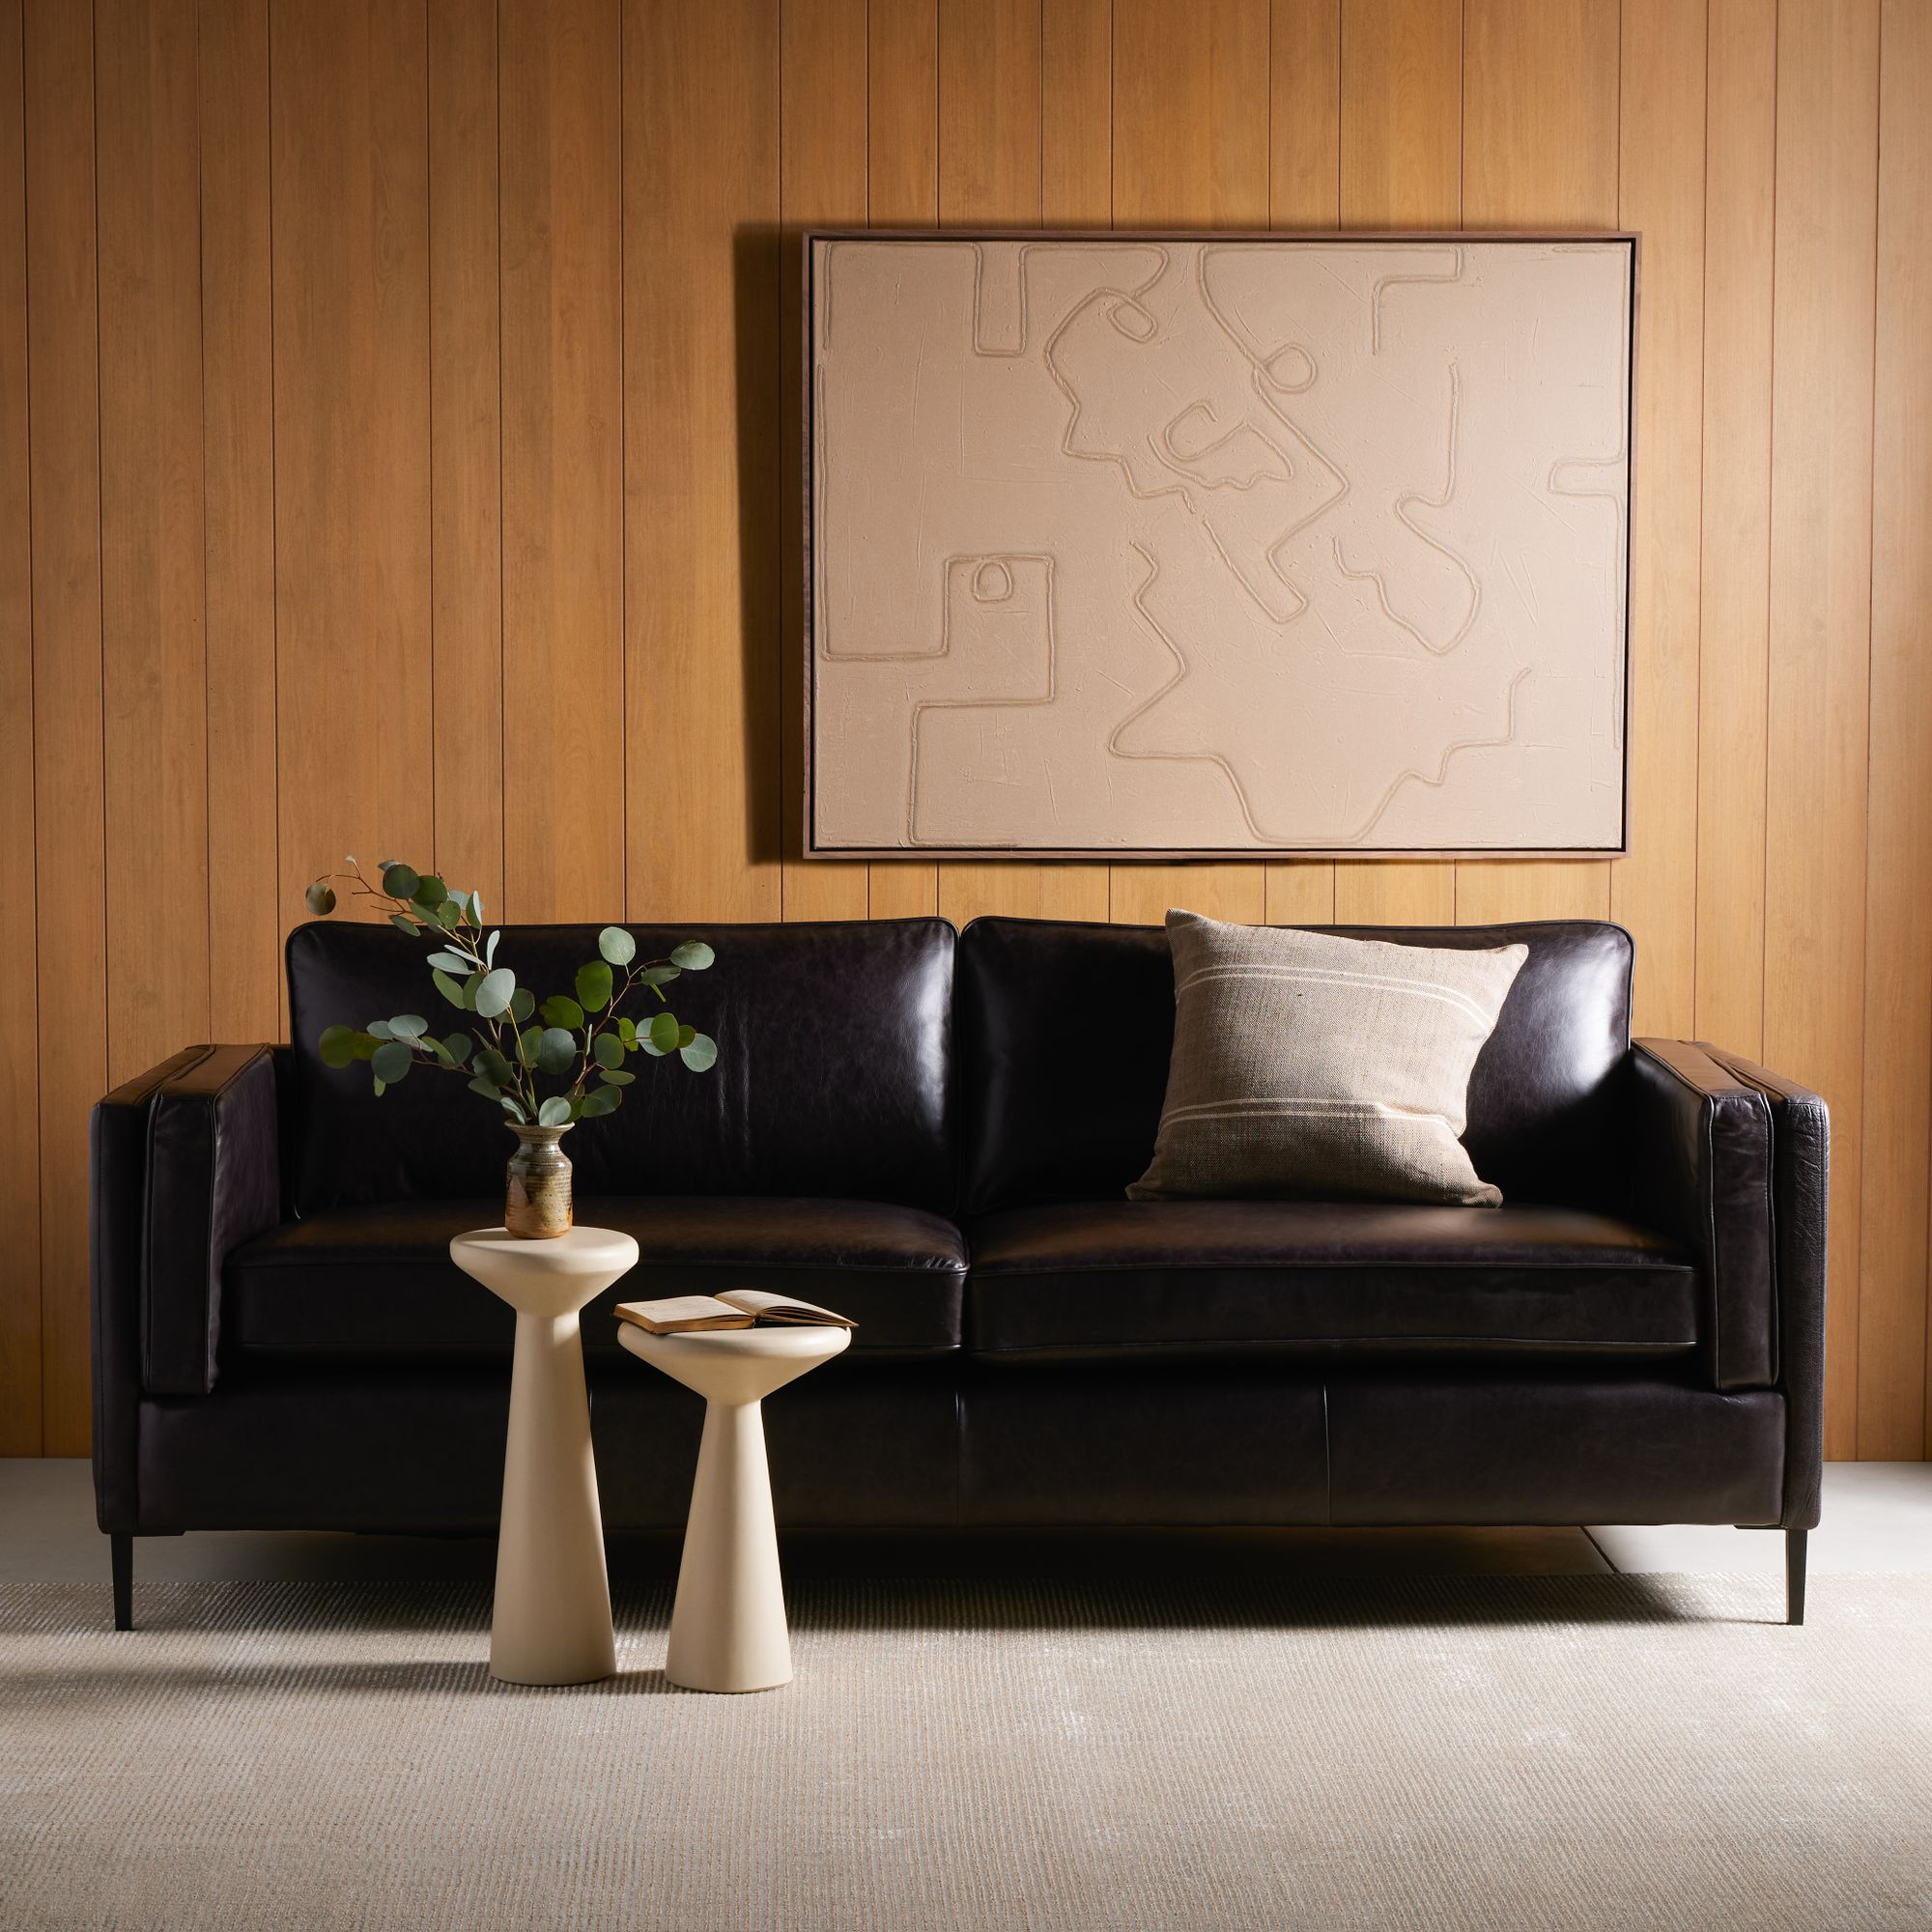 West Elm Modern Chesterfield Leather Sofa by West Elm - Dwell